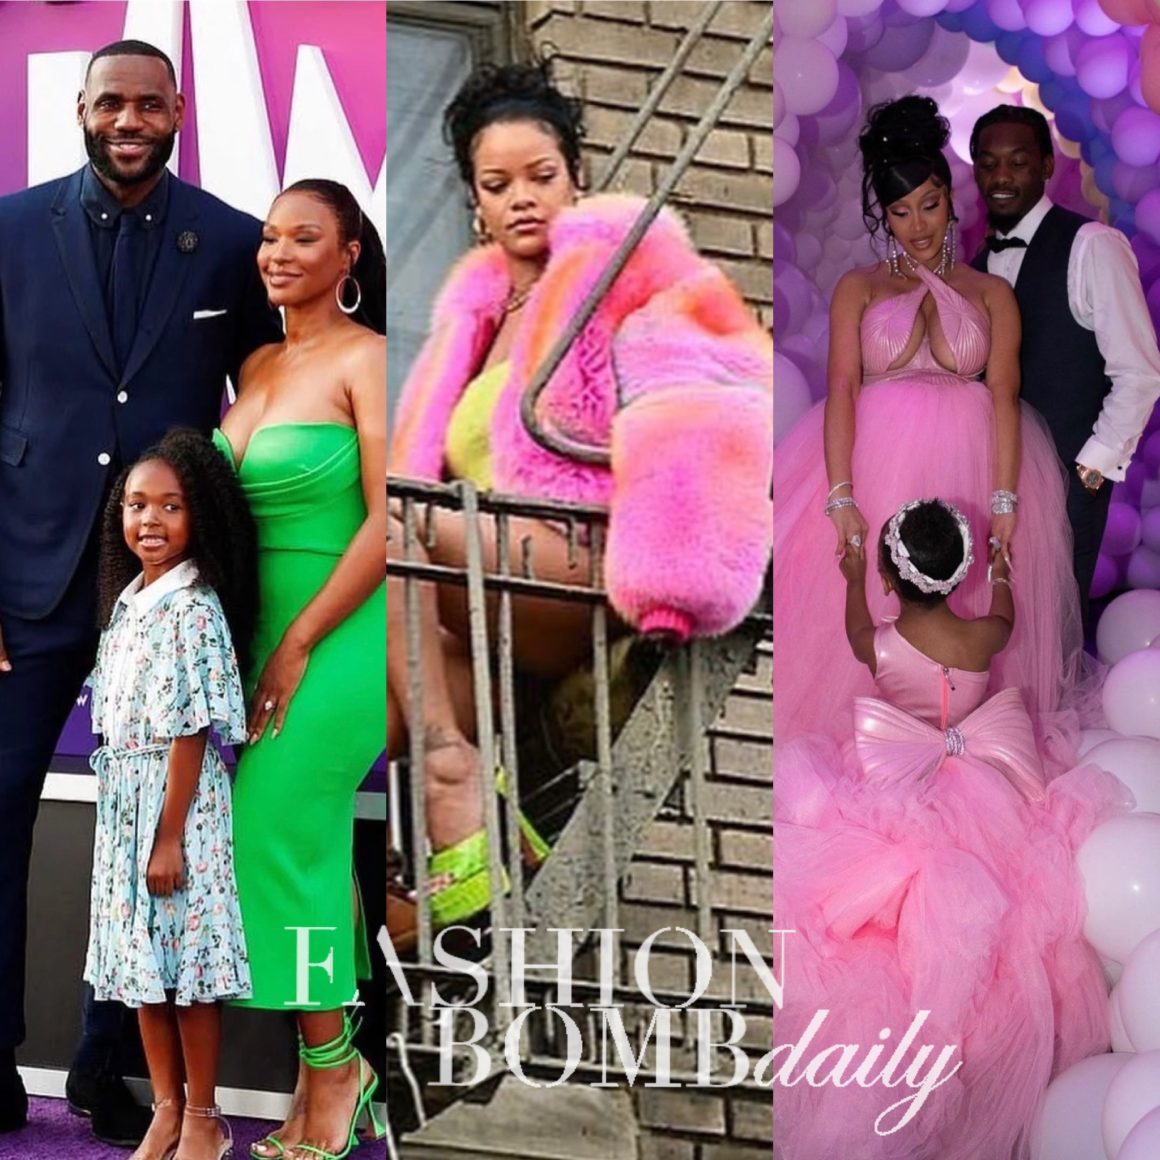 LeBron's Wife Savannah James' Stylist on Her Viral Red Carpet